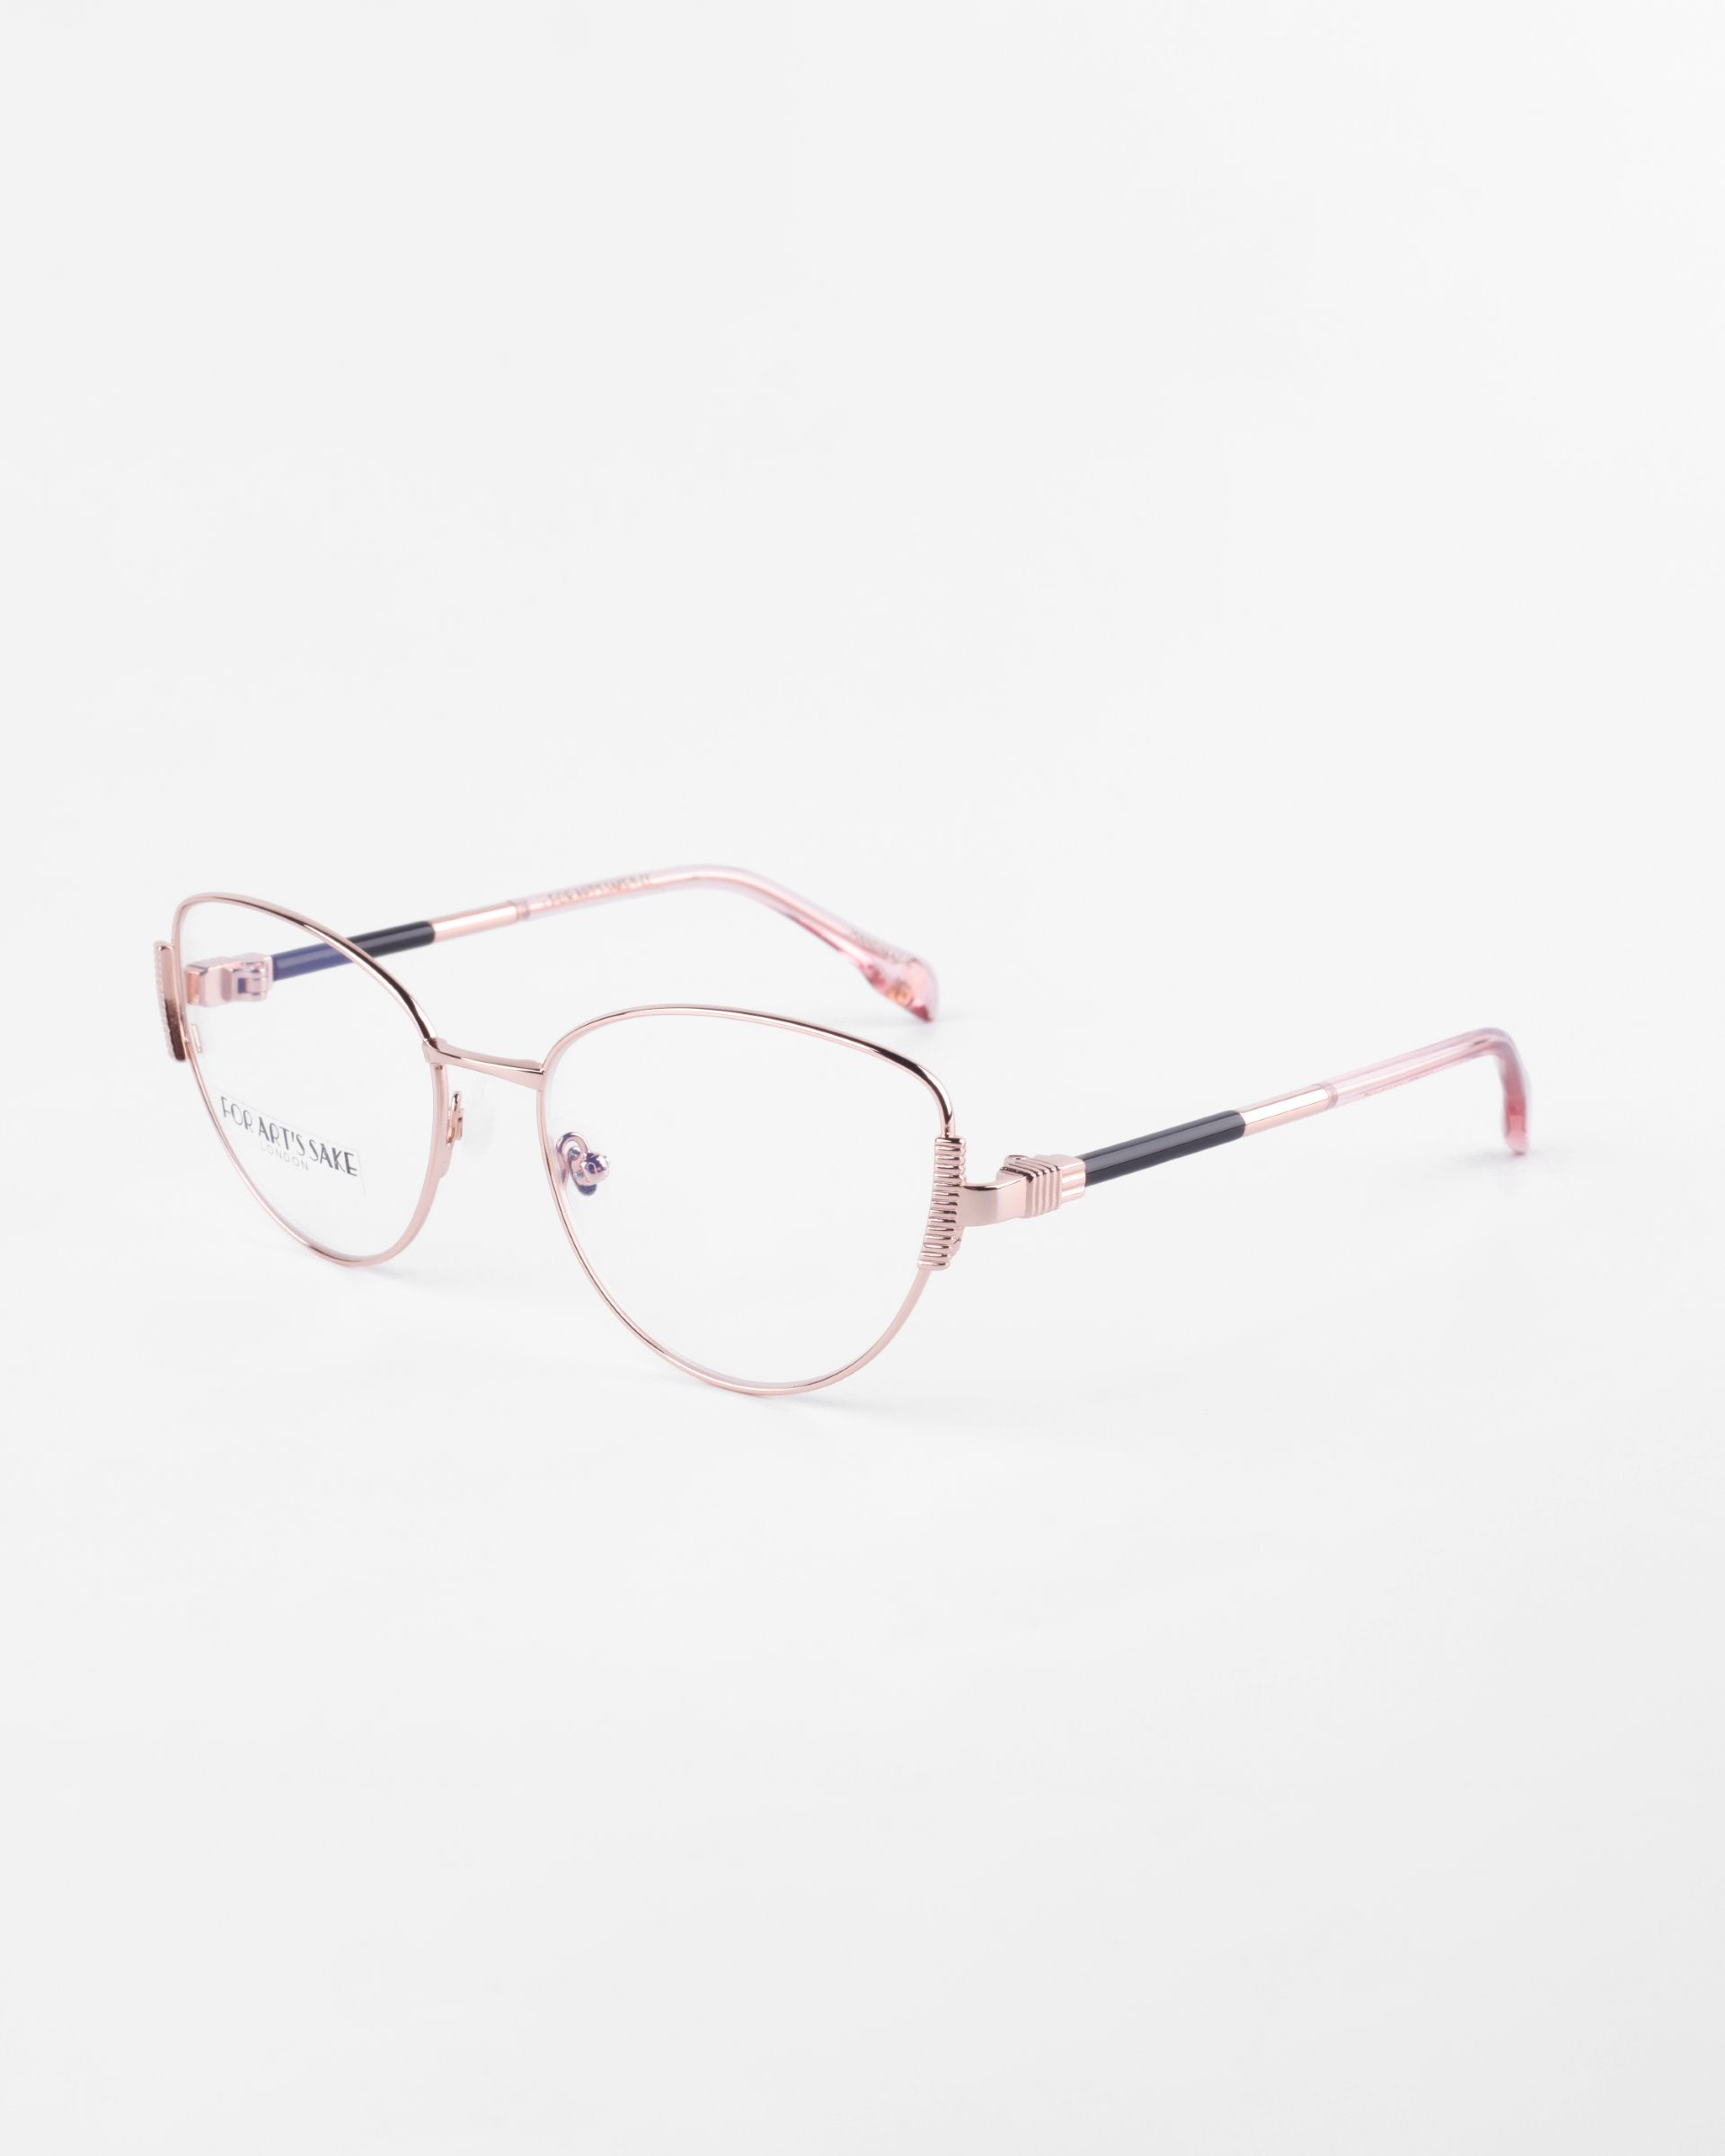 A pair of For Art&#39;s Sake® Dante eyeglasses with thin, rose gold metallic frames and clear prescription lenses. The temple arms are rose gold with black accents near the hinges, and the transparent nose pads include a blue light filter. The eyeglasses are set against a plain white background.